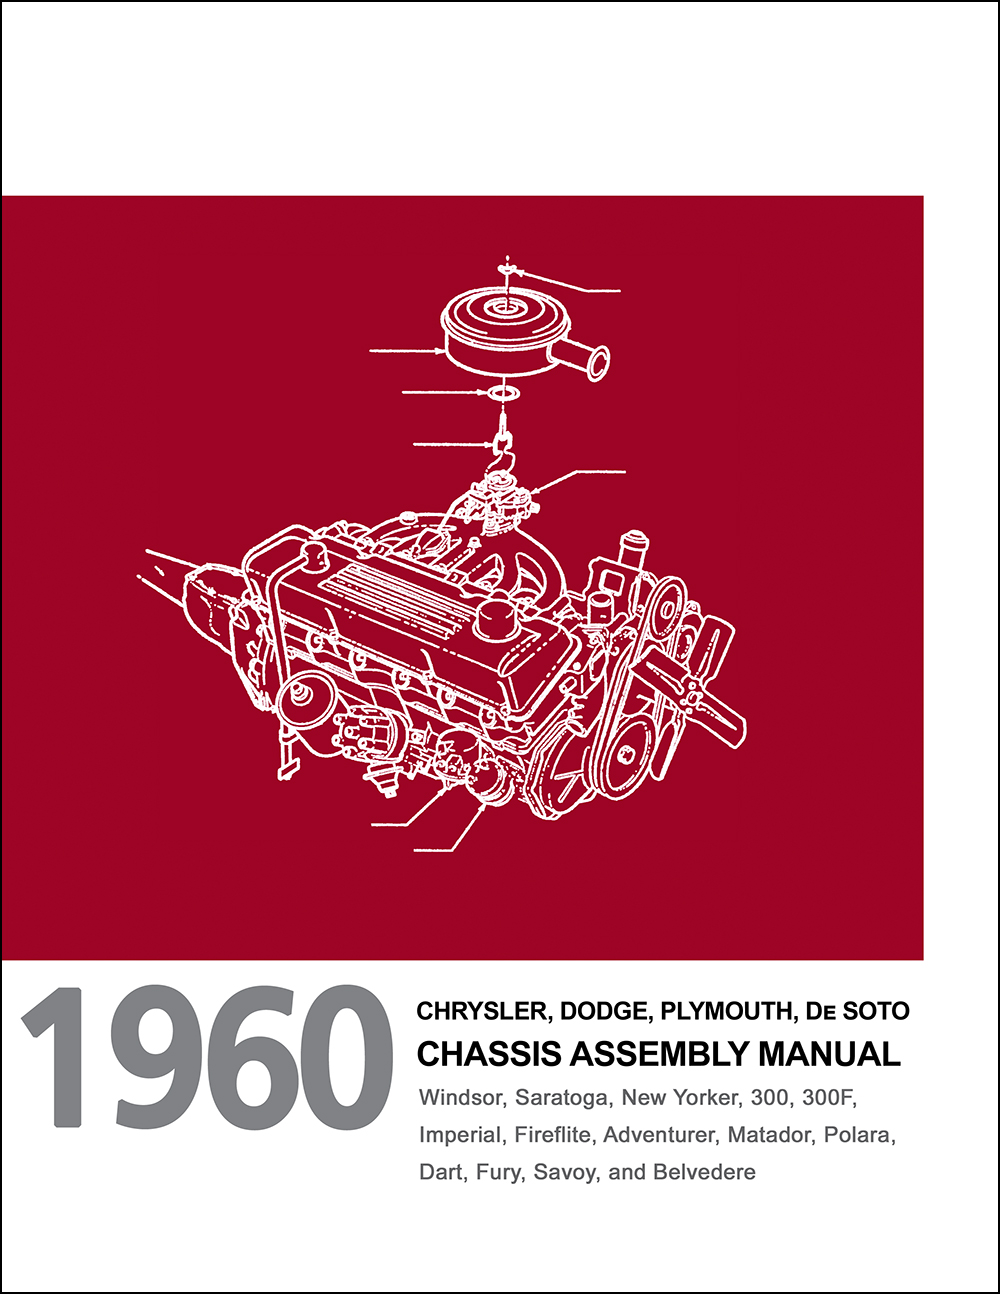 1960 Chassis Assembly Manual Reprint Chrysler Dodge Plymouth De Soto